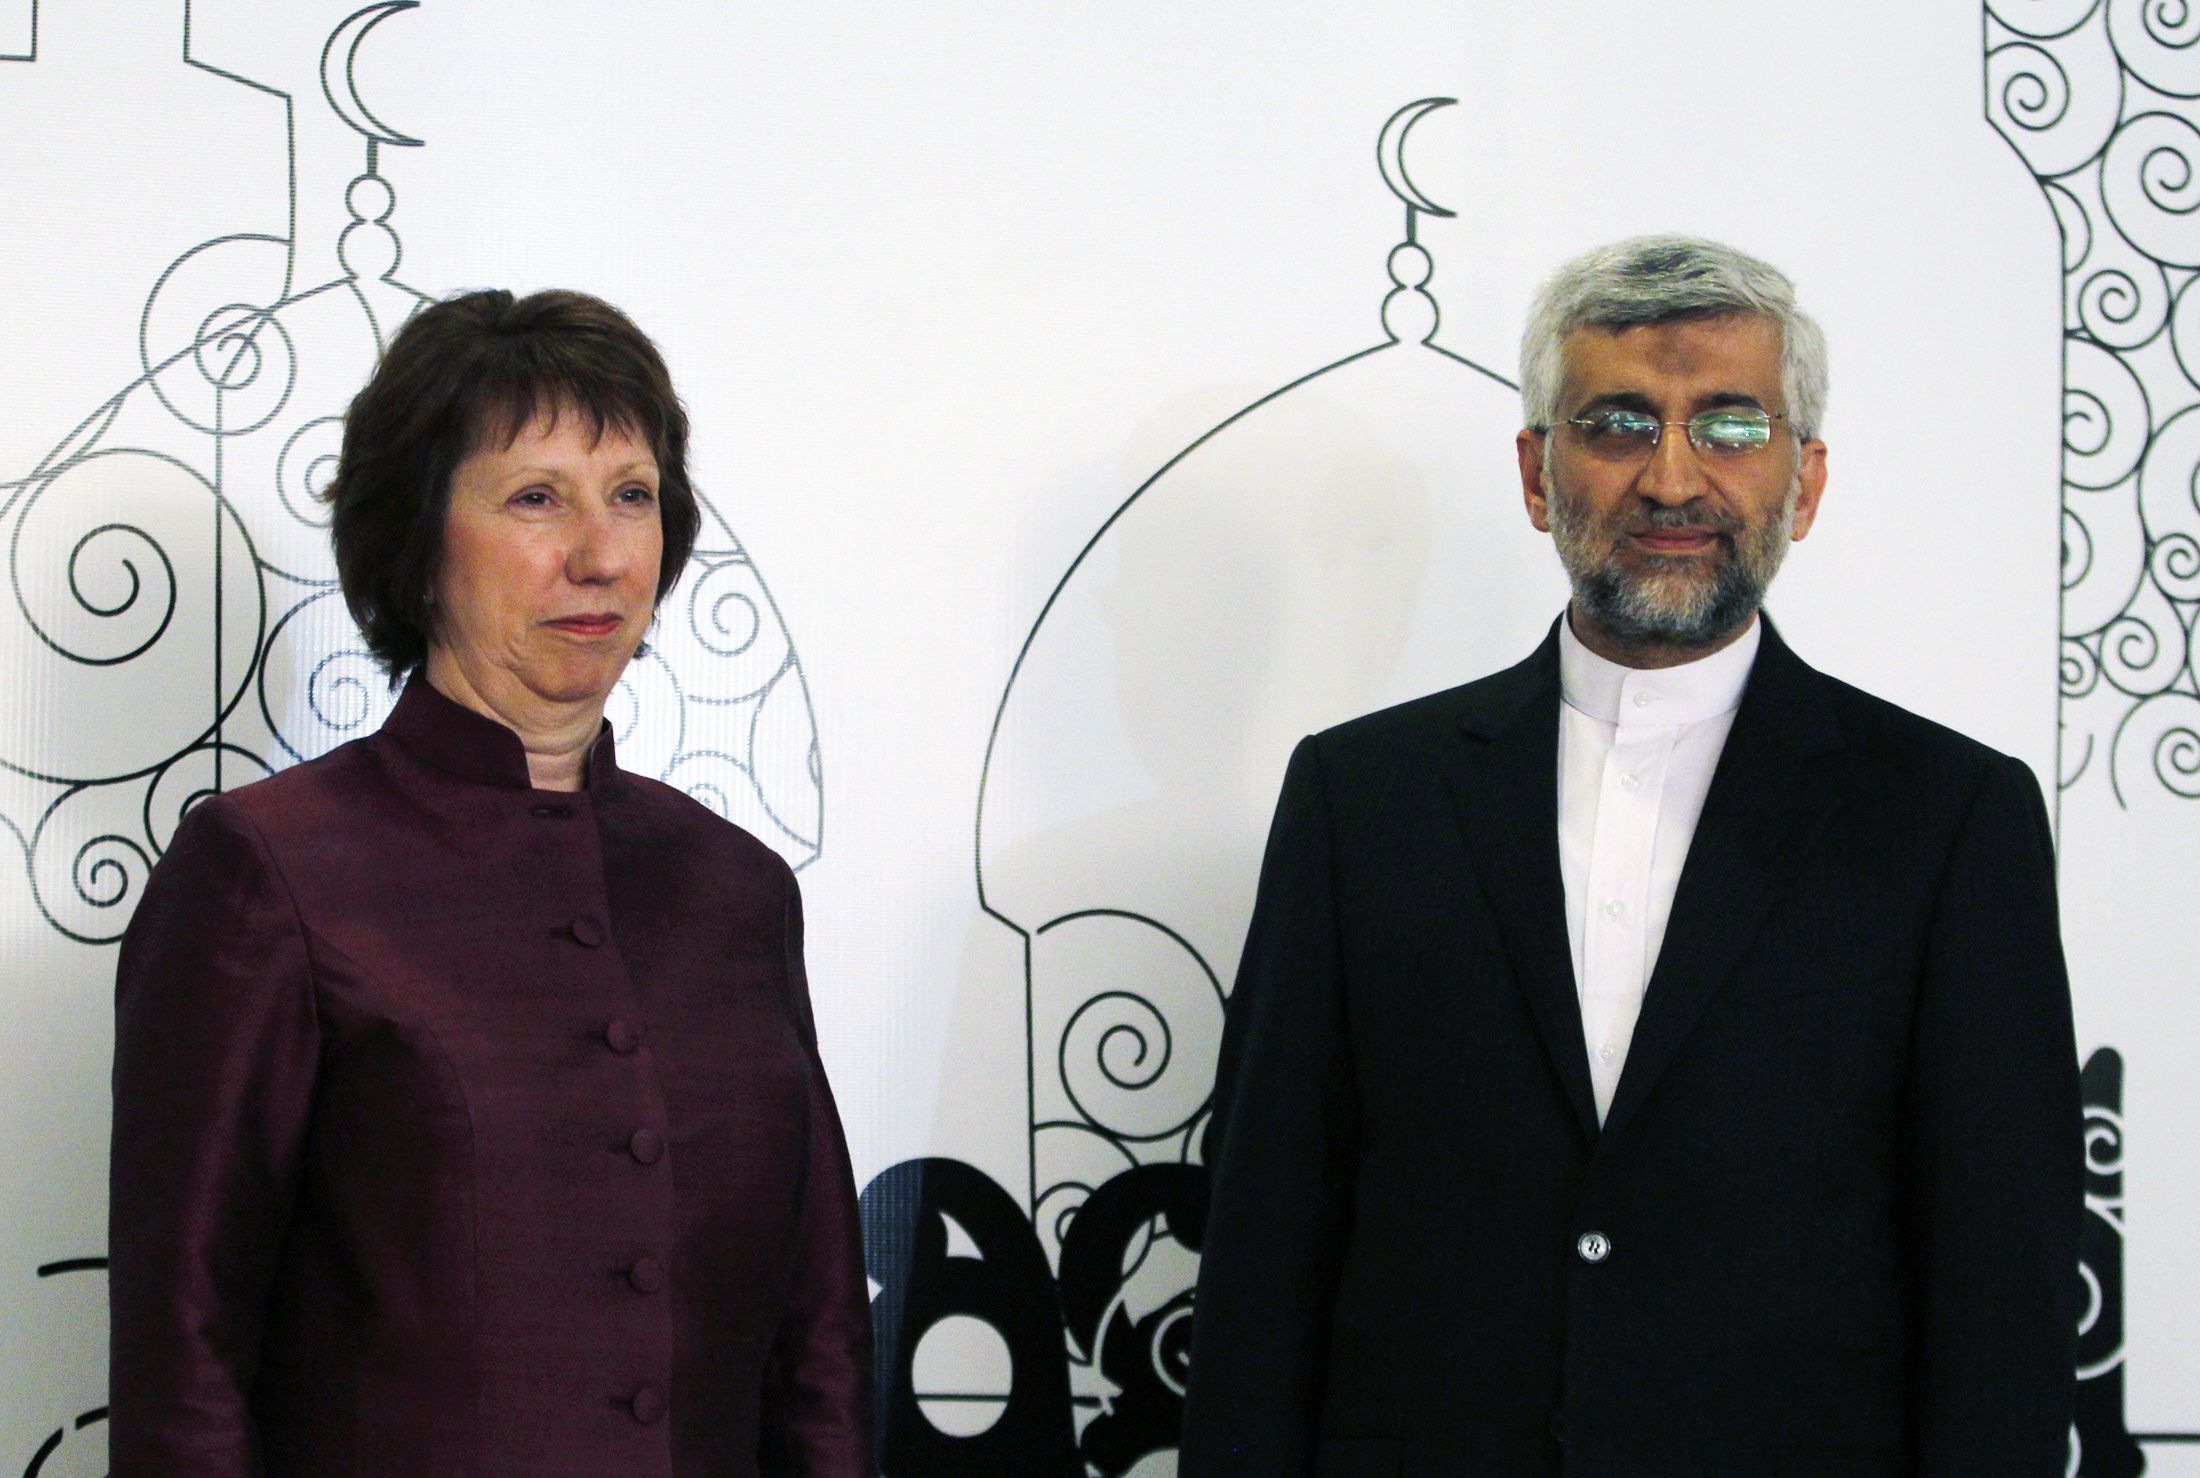 EU Foreign Policy Chief Catherine Ashton and Saeed Jalili, Secretary of Iran's Supreme National Security Council